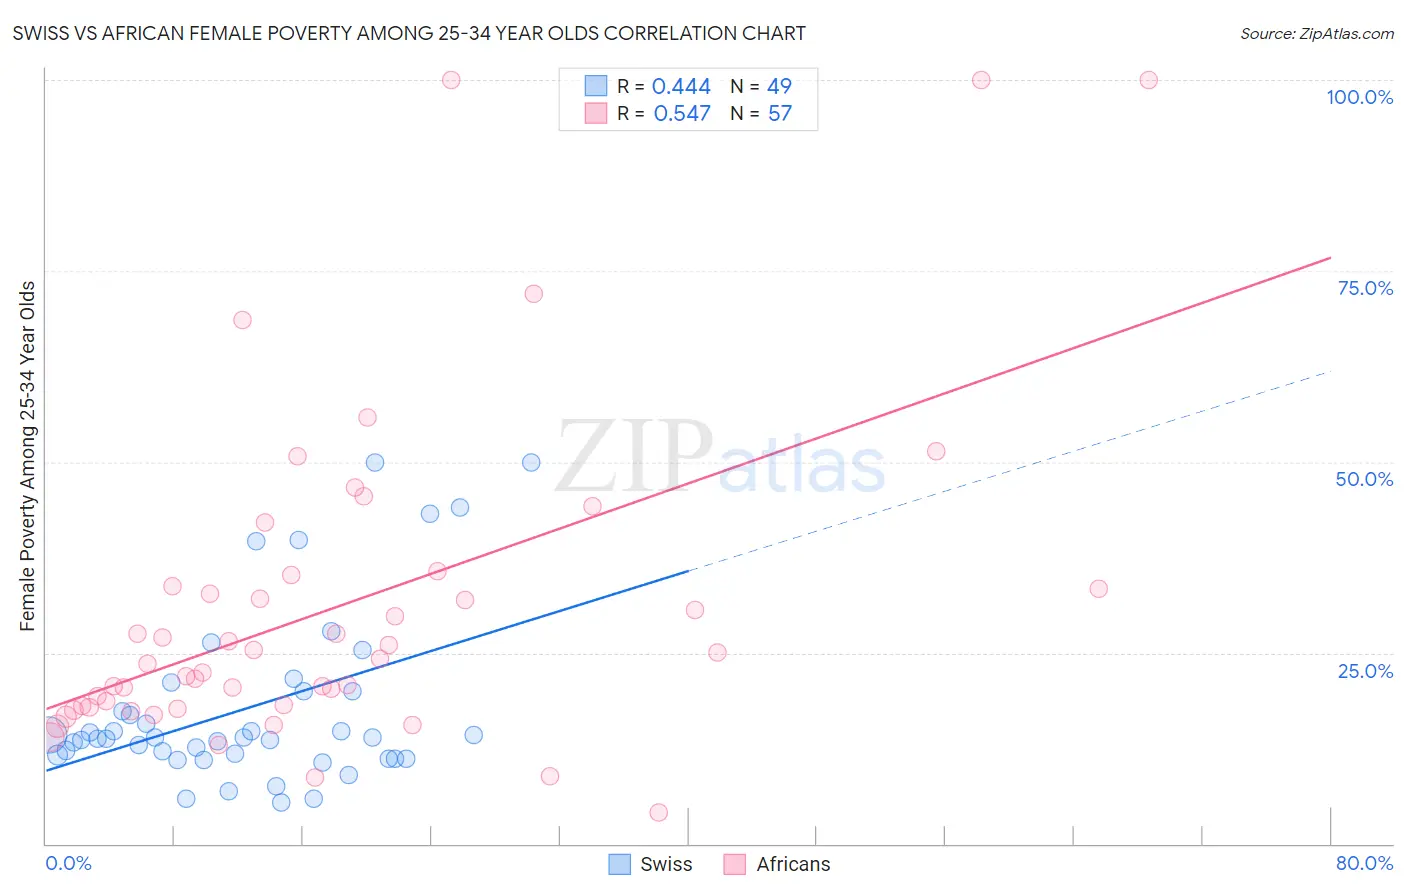 Swiss vs African Female Poverty Among 25-34 Year Olds